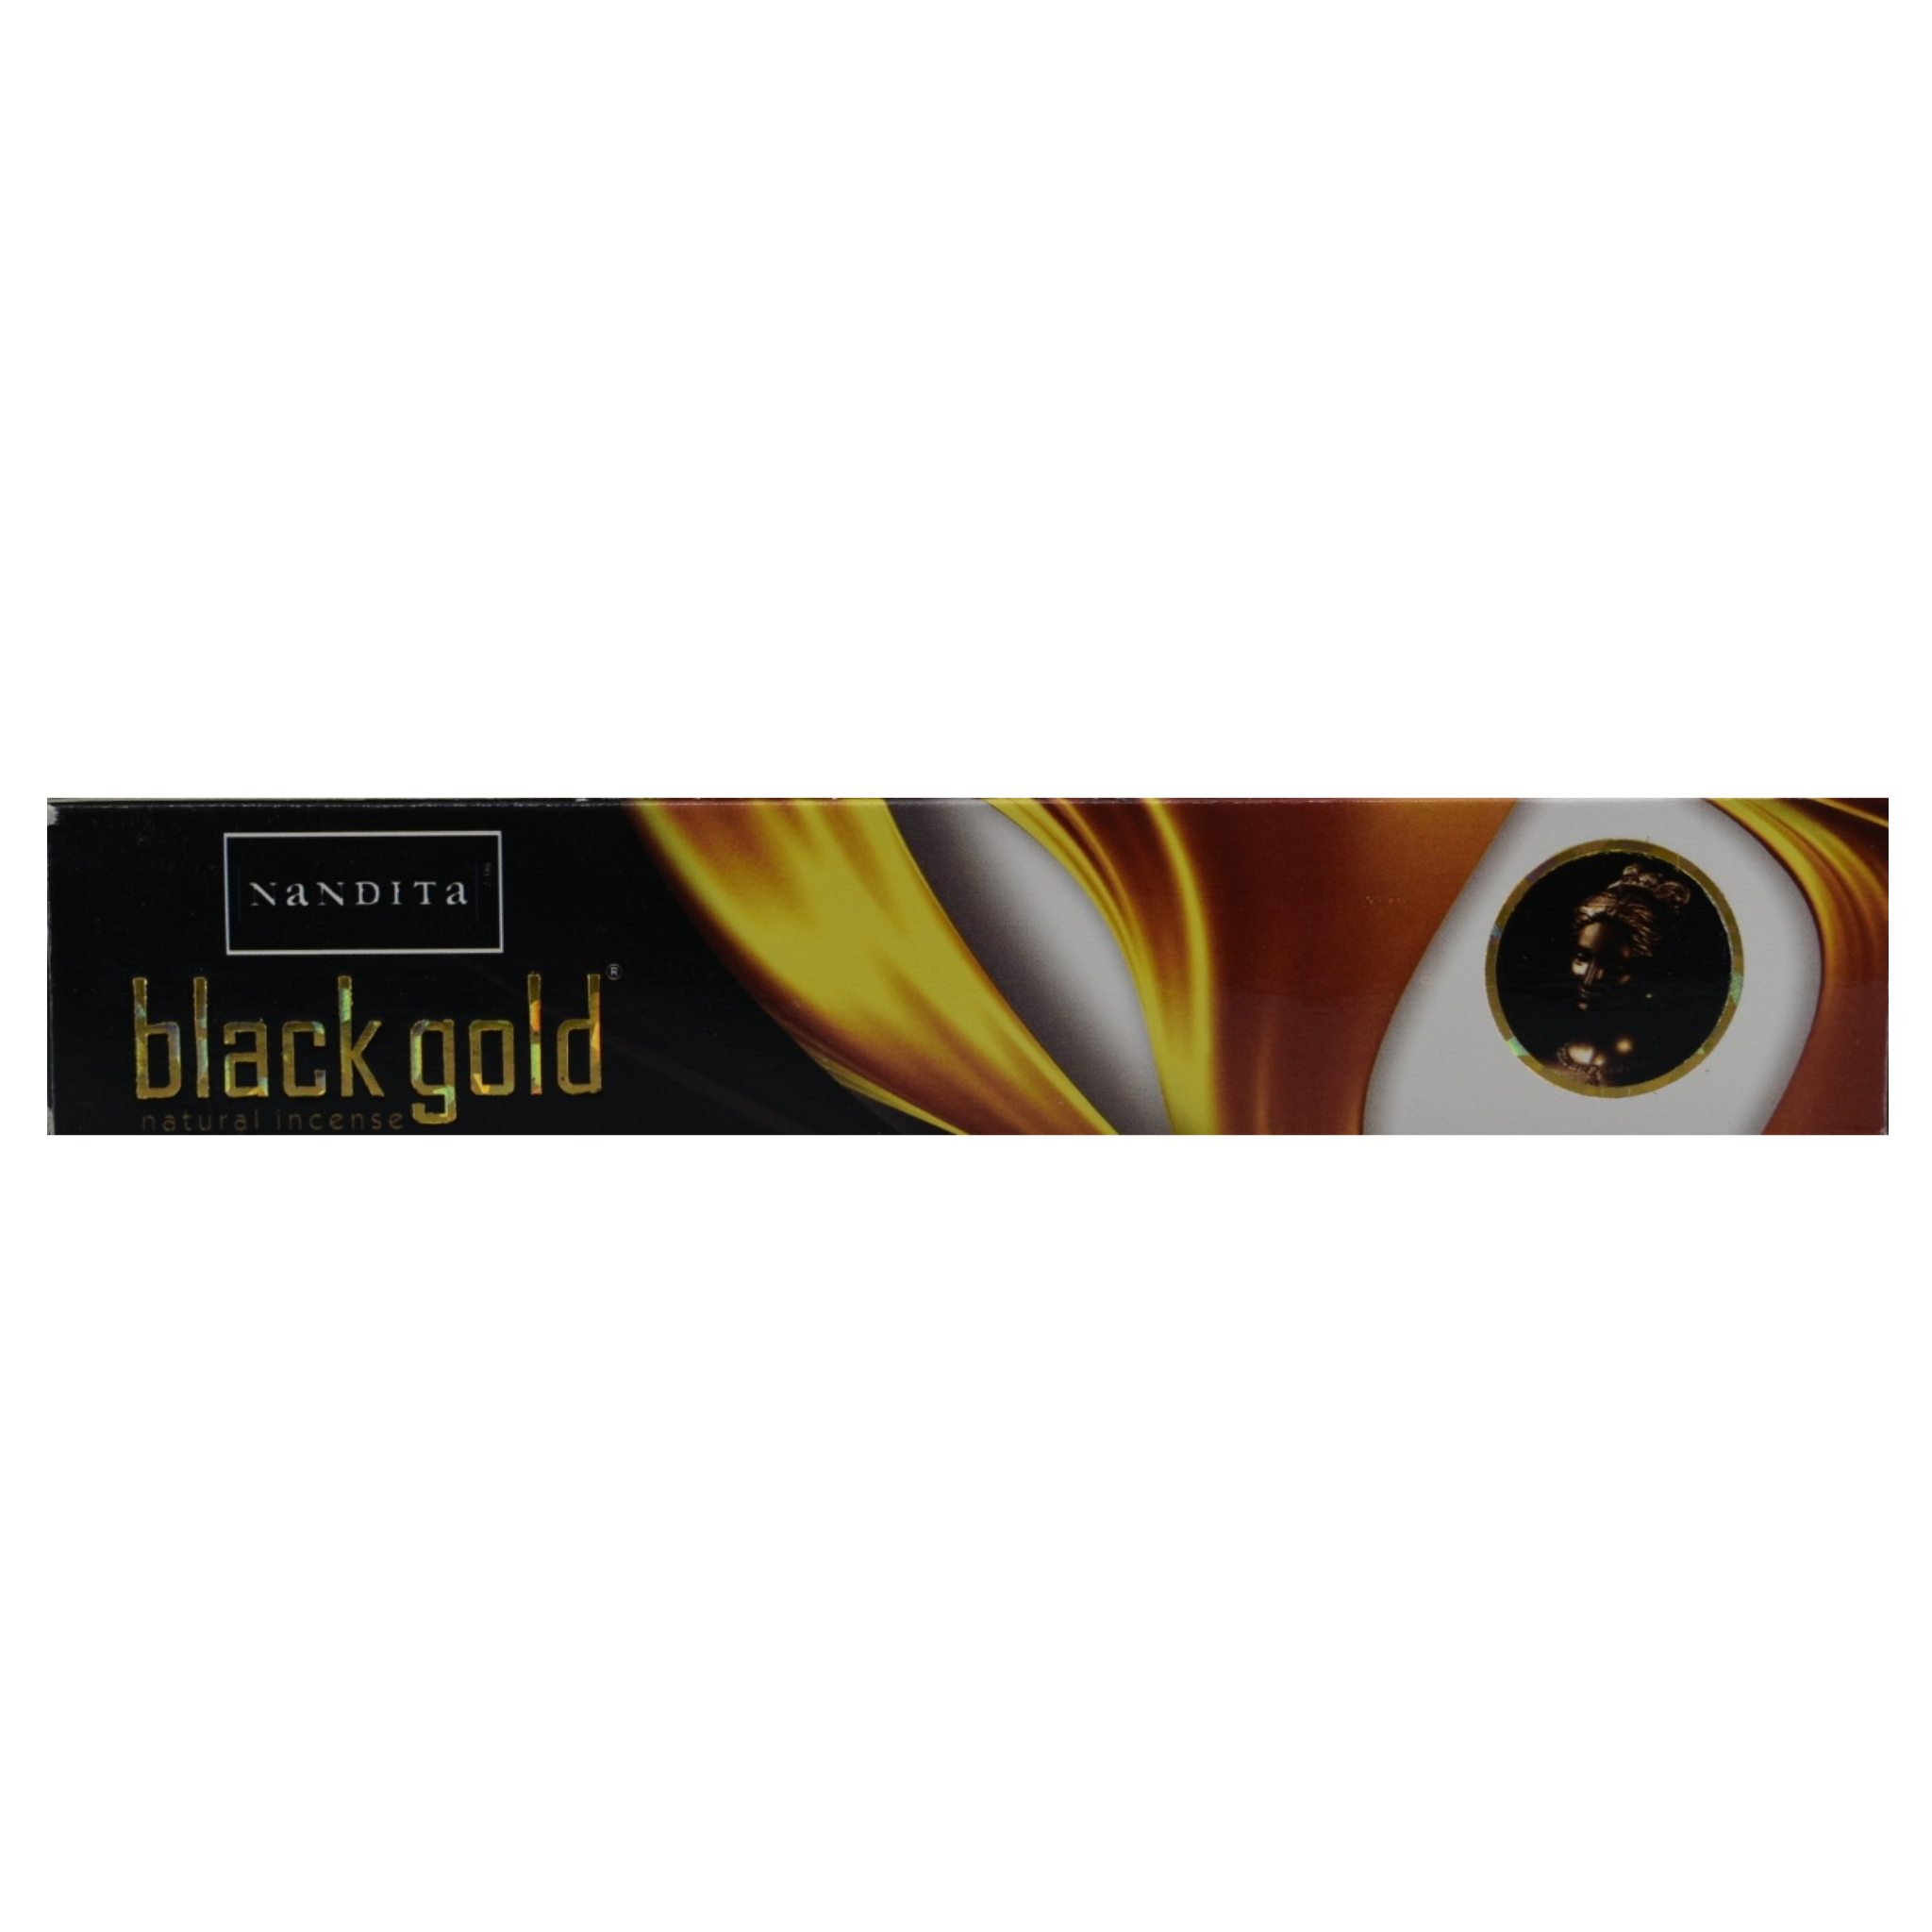 Black Gold Incense Sticks.  The box has a black background on the left side.  The title Black Gold natural incense is in gold.  The rectangle above the title lists the company name Nandita.  The middle and right side give the impression the gold is flowing with some white background.  In the white area is a black background coin with a gold bust in it and the outside circle is gold.  